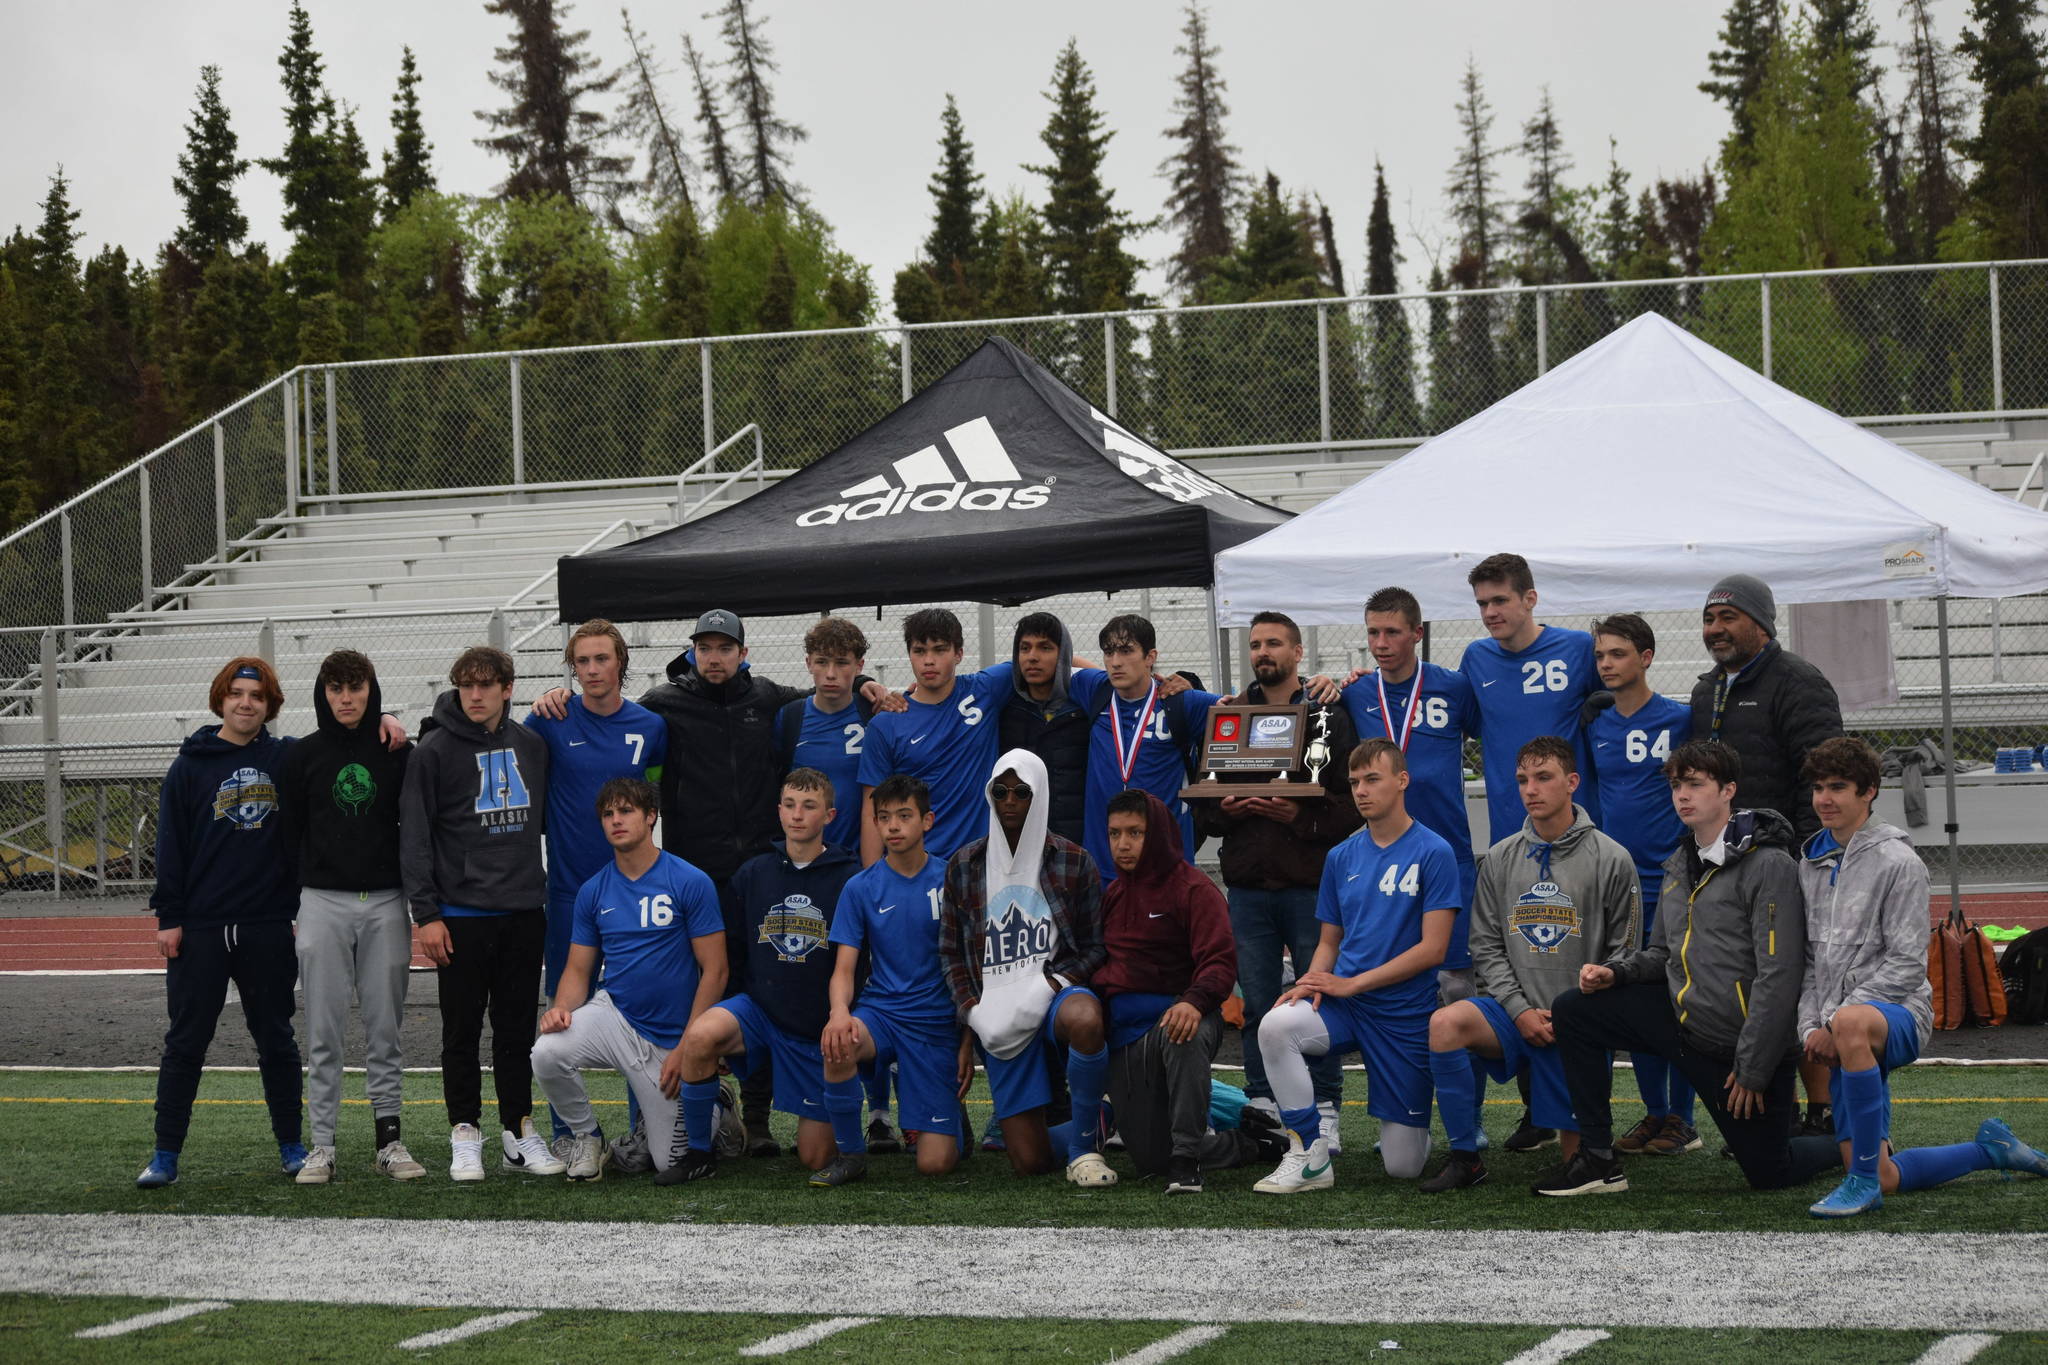 The Soldotna High School boys varsity soccer team wins second place at the state championship game in Anchorage, Alaska on Saturday, May 29, 2021. (Camille Botello / Peninsula Clarion)